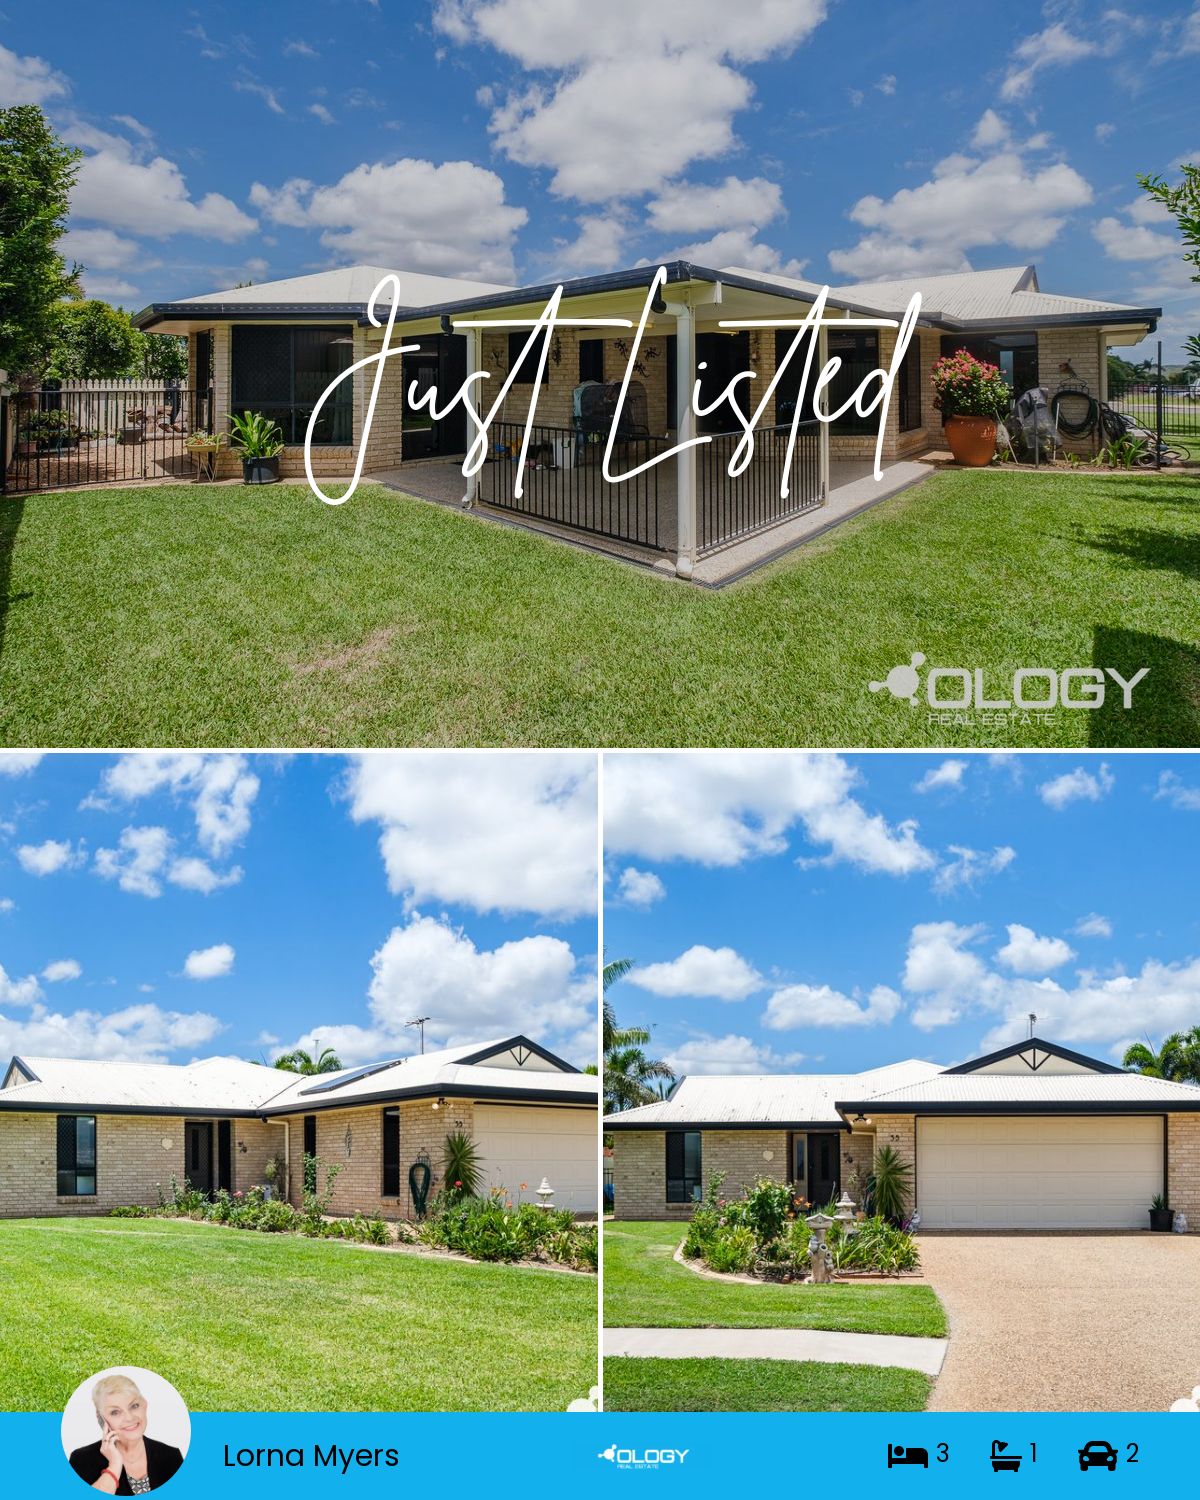 35 Bland Street, Gracemere, QLD 4702 | Realty.com.au